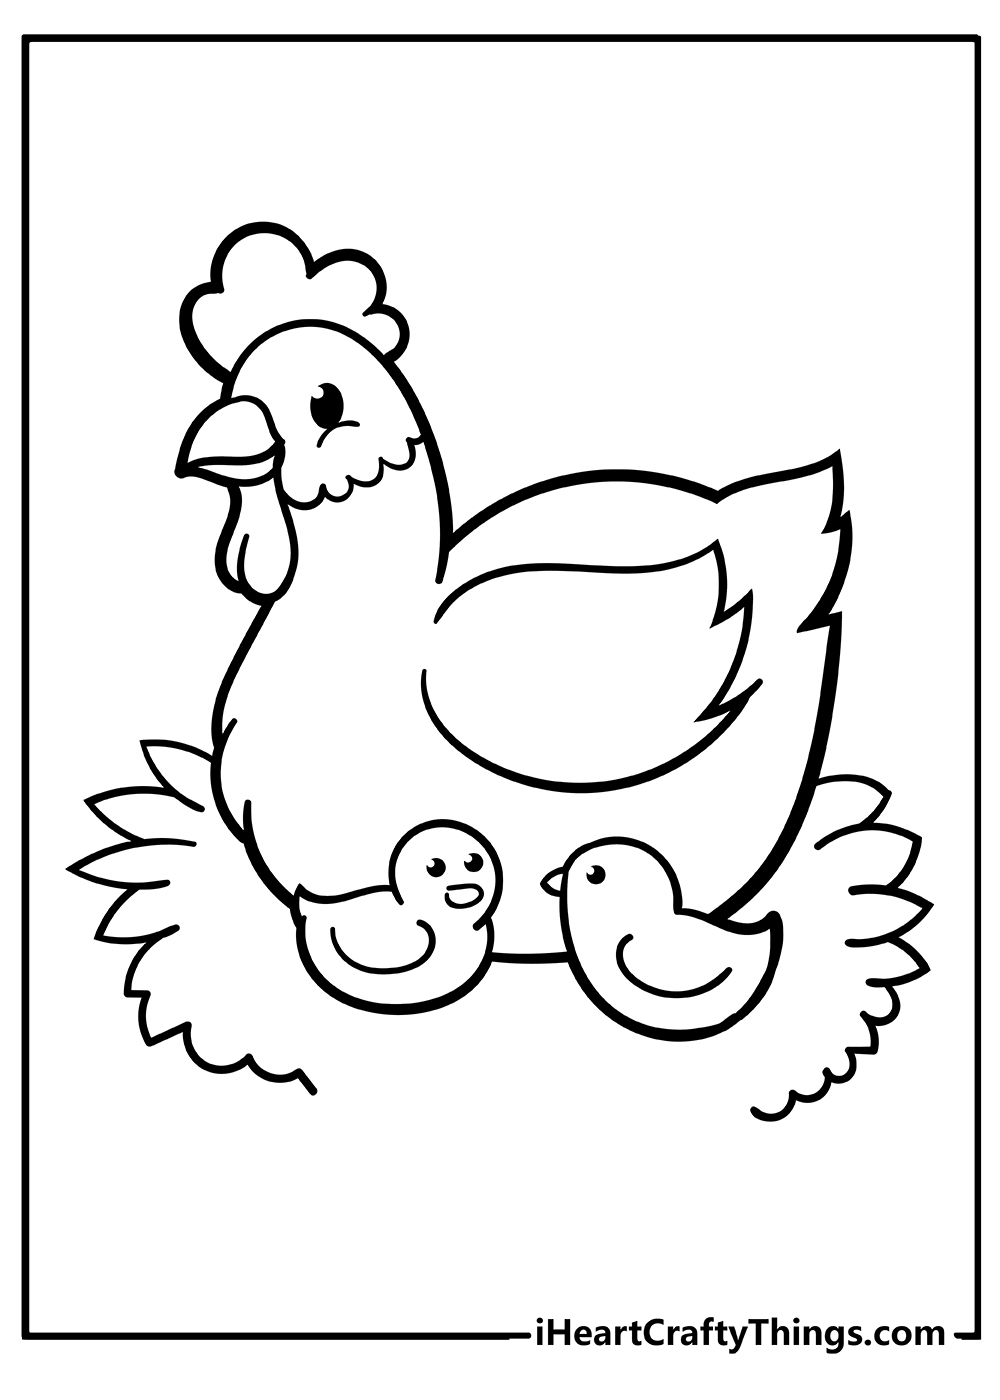 Printable Farm Animal Coloring Pages Updated 21